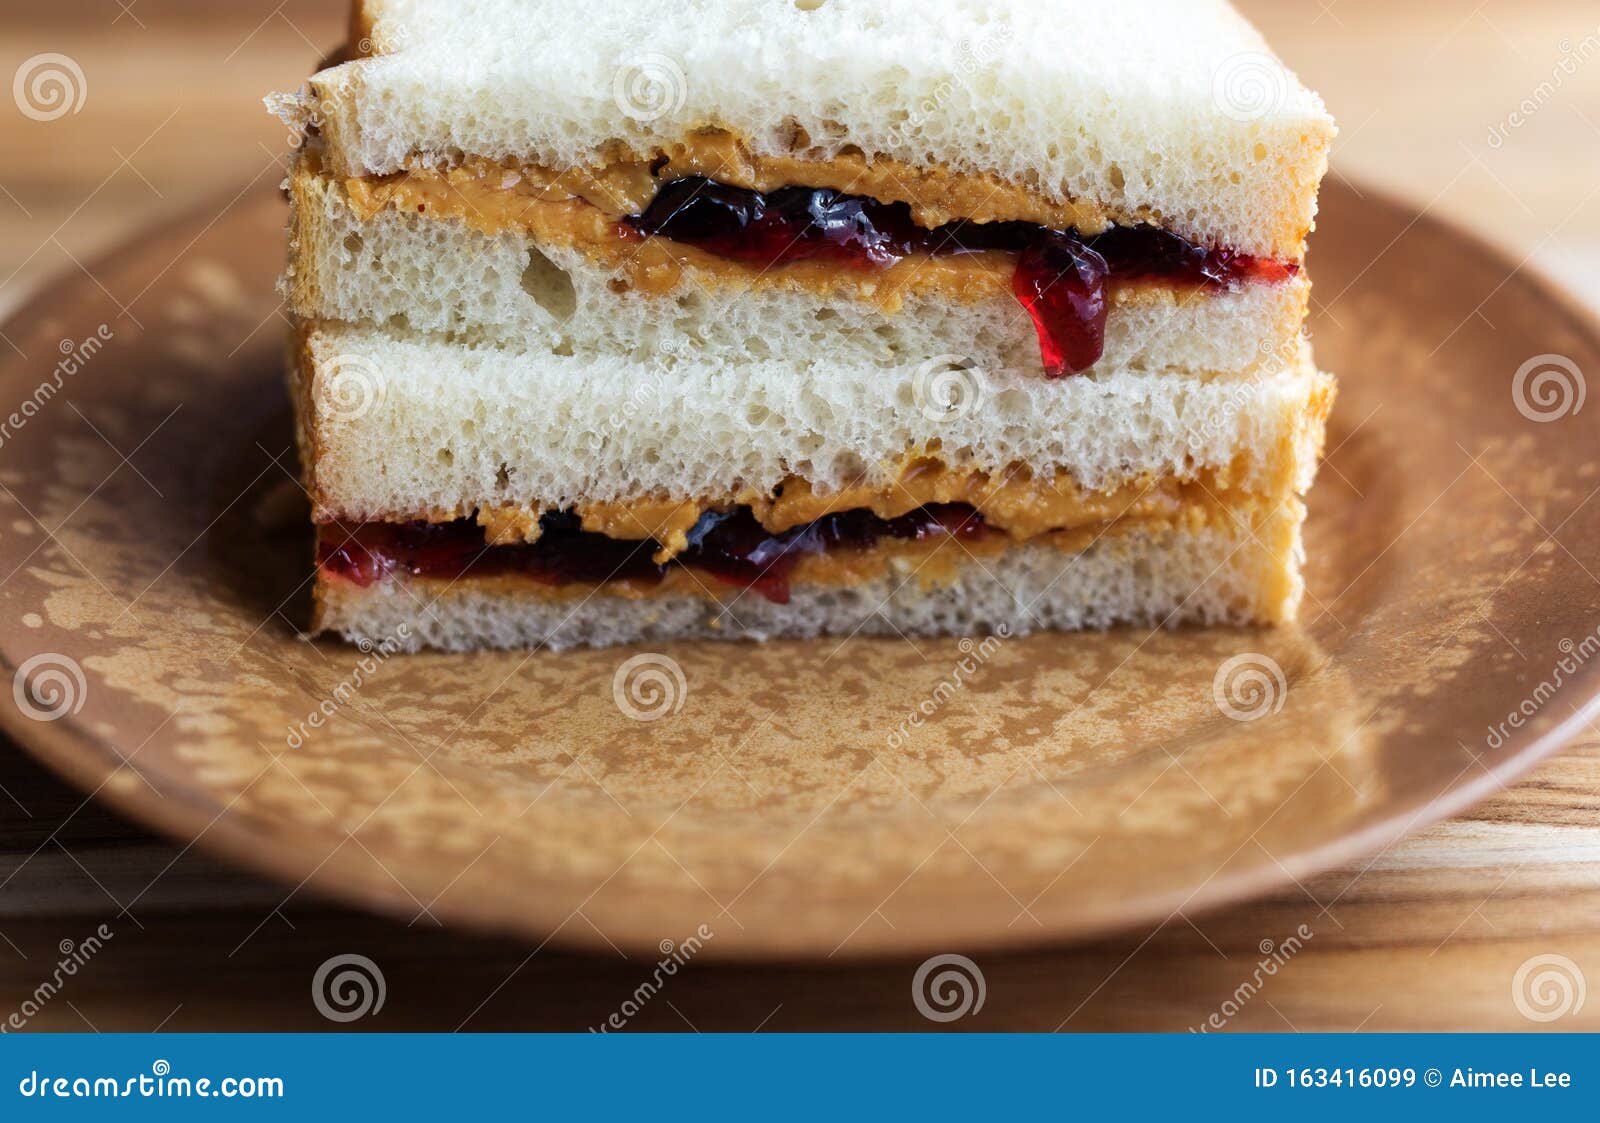 Peanut Butter And Jelly Sandwich On White Bread Cut In Half And Stacked Close Up View Stock Image Image Of Childhood Jelly